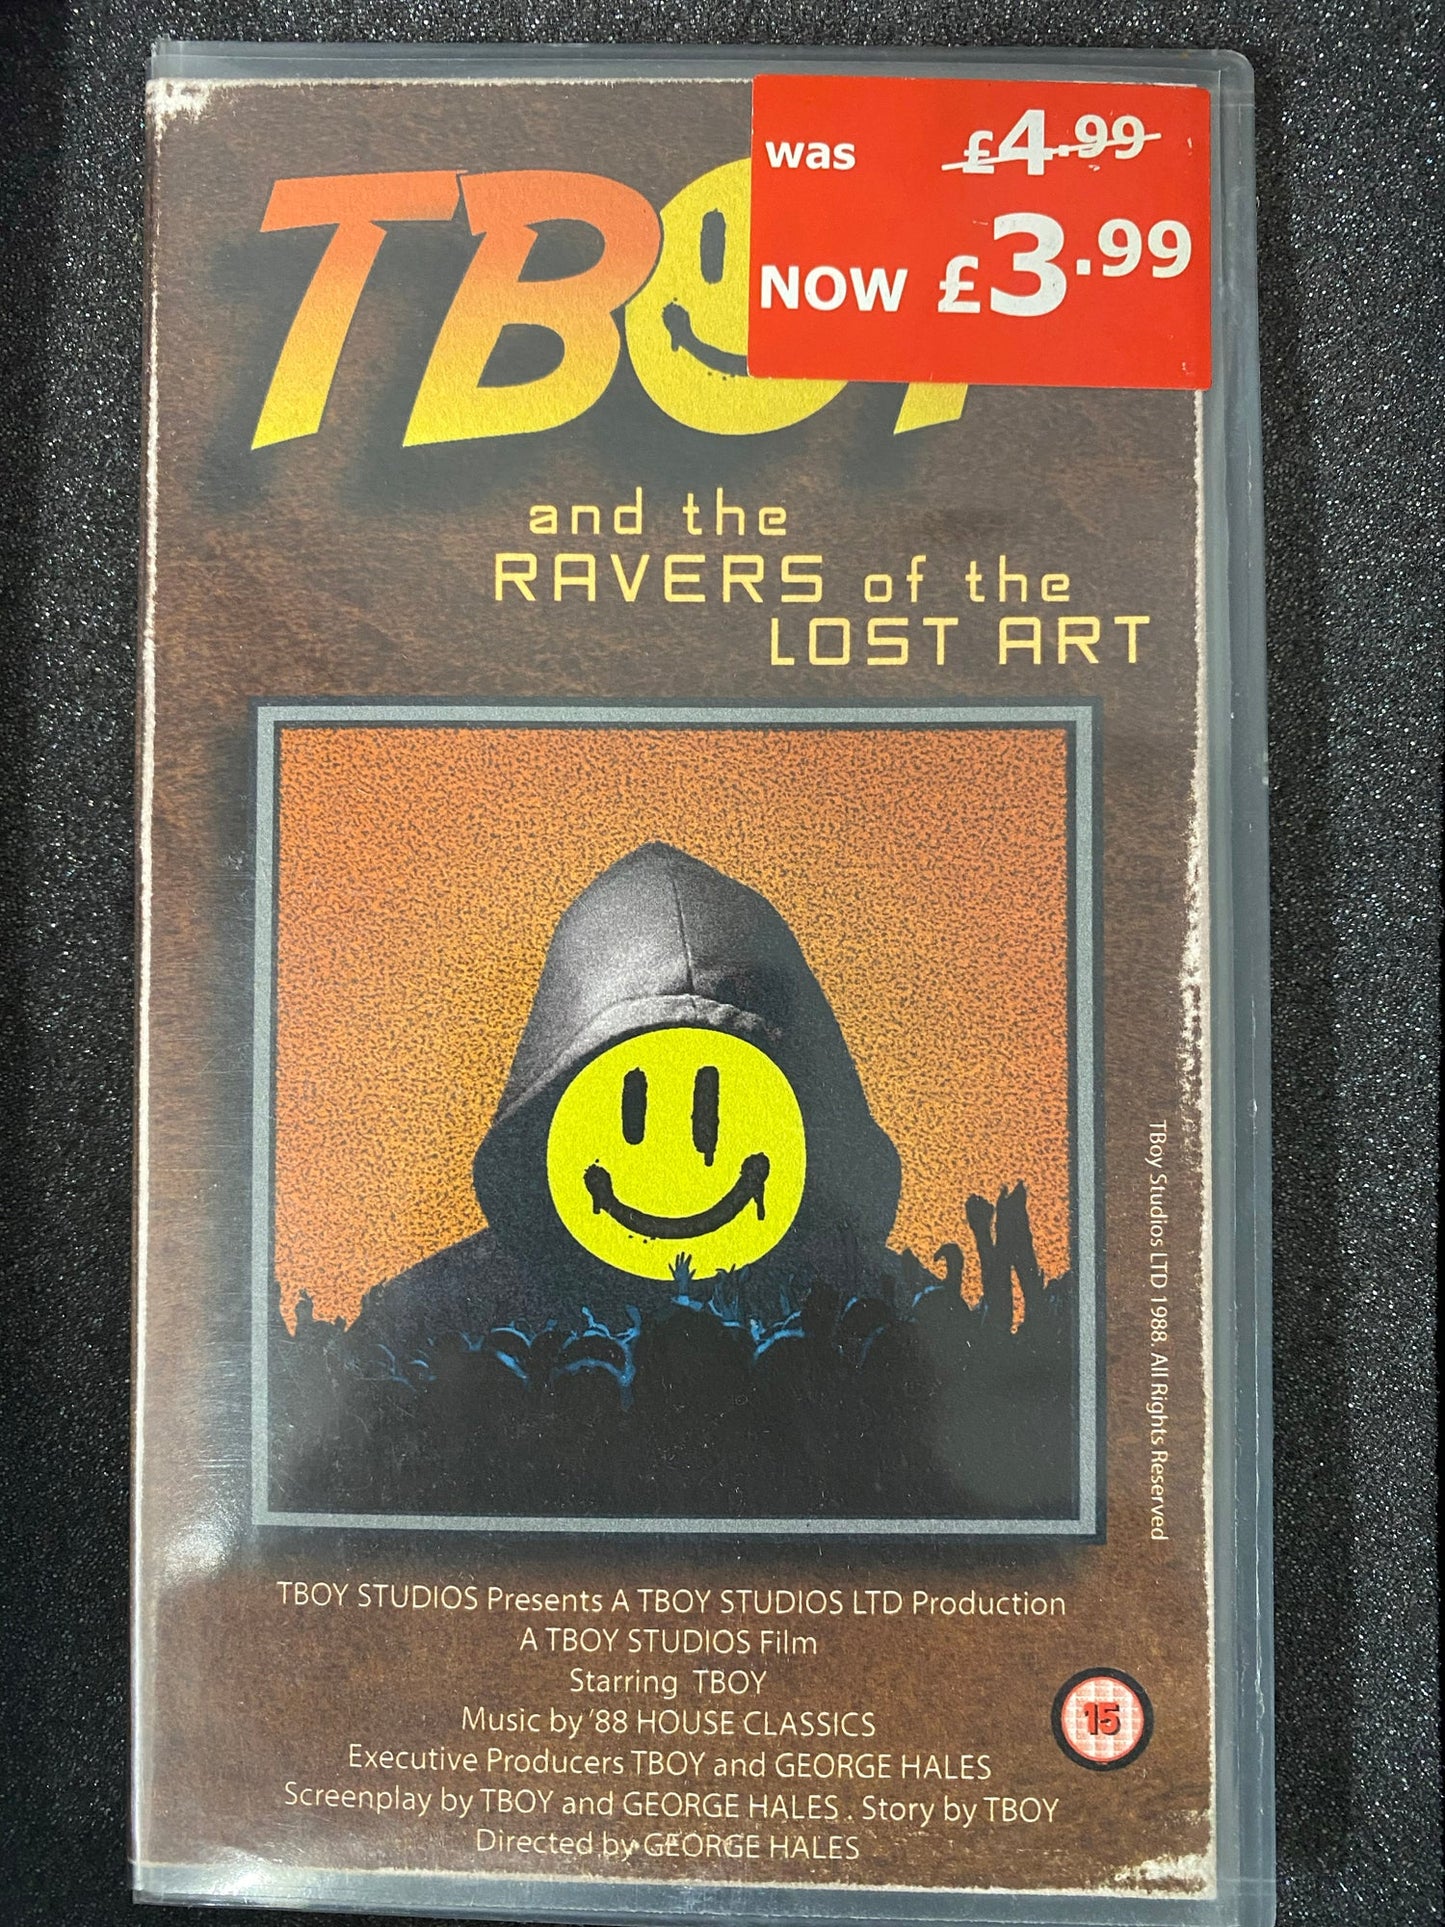 Ravers Of The Lost Art collectors VHS encased bank note edition of 6 - Smolensky Gallery